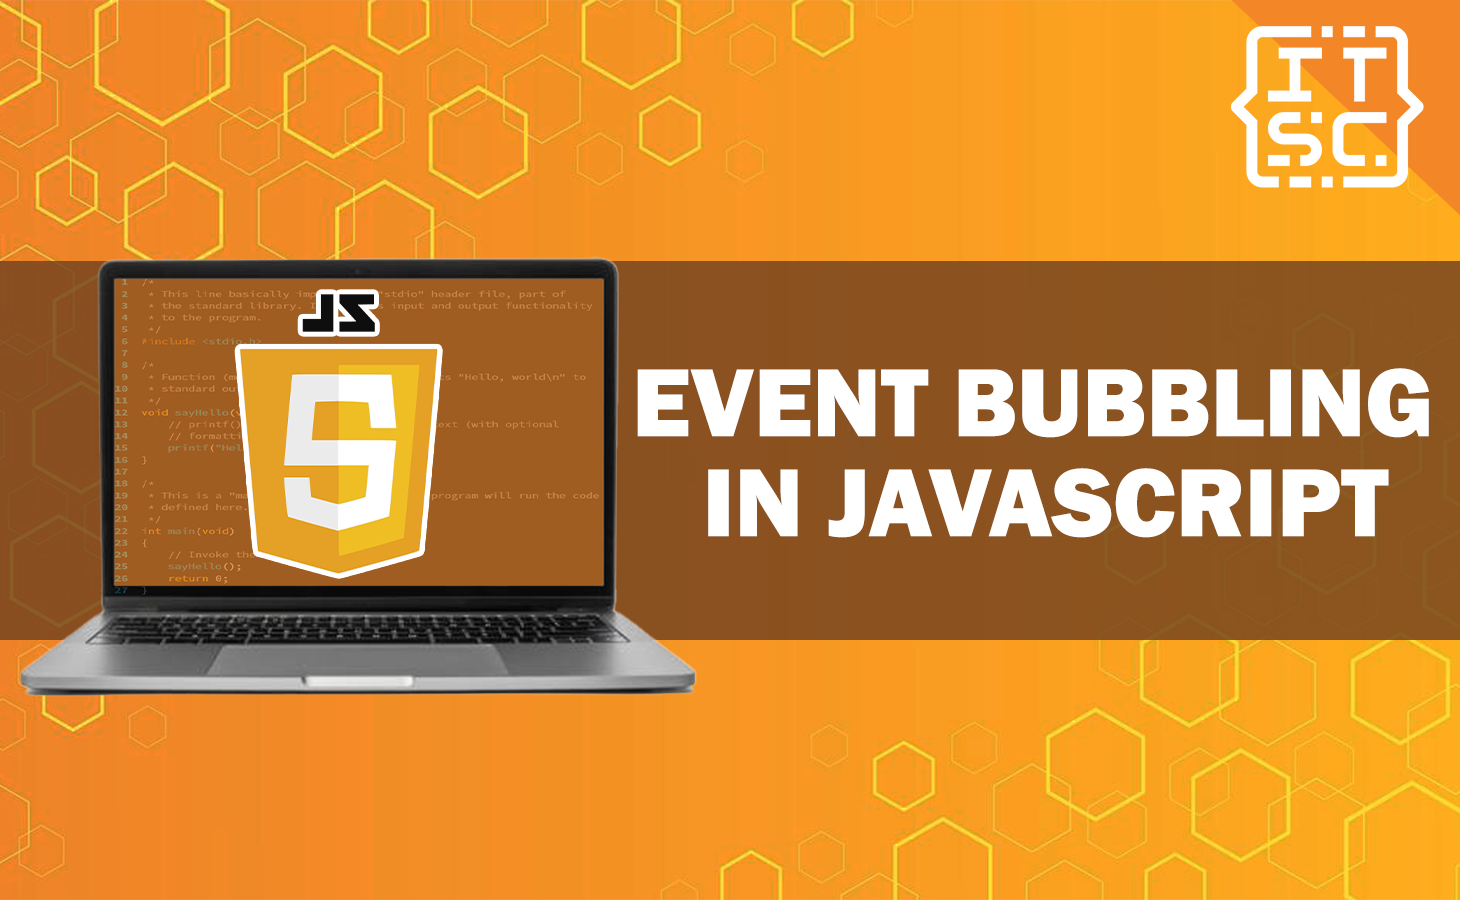 What is Event bubbling and Event capturing in JavaScript?